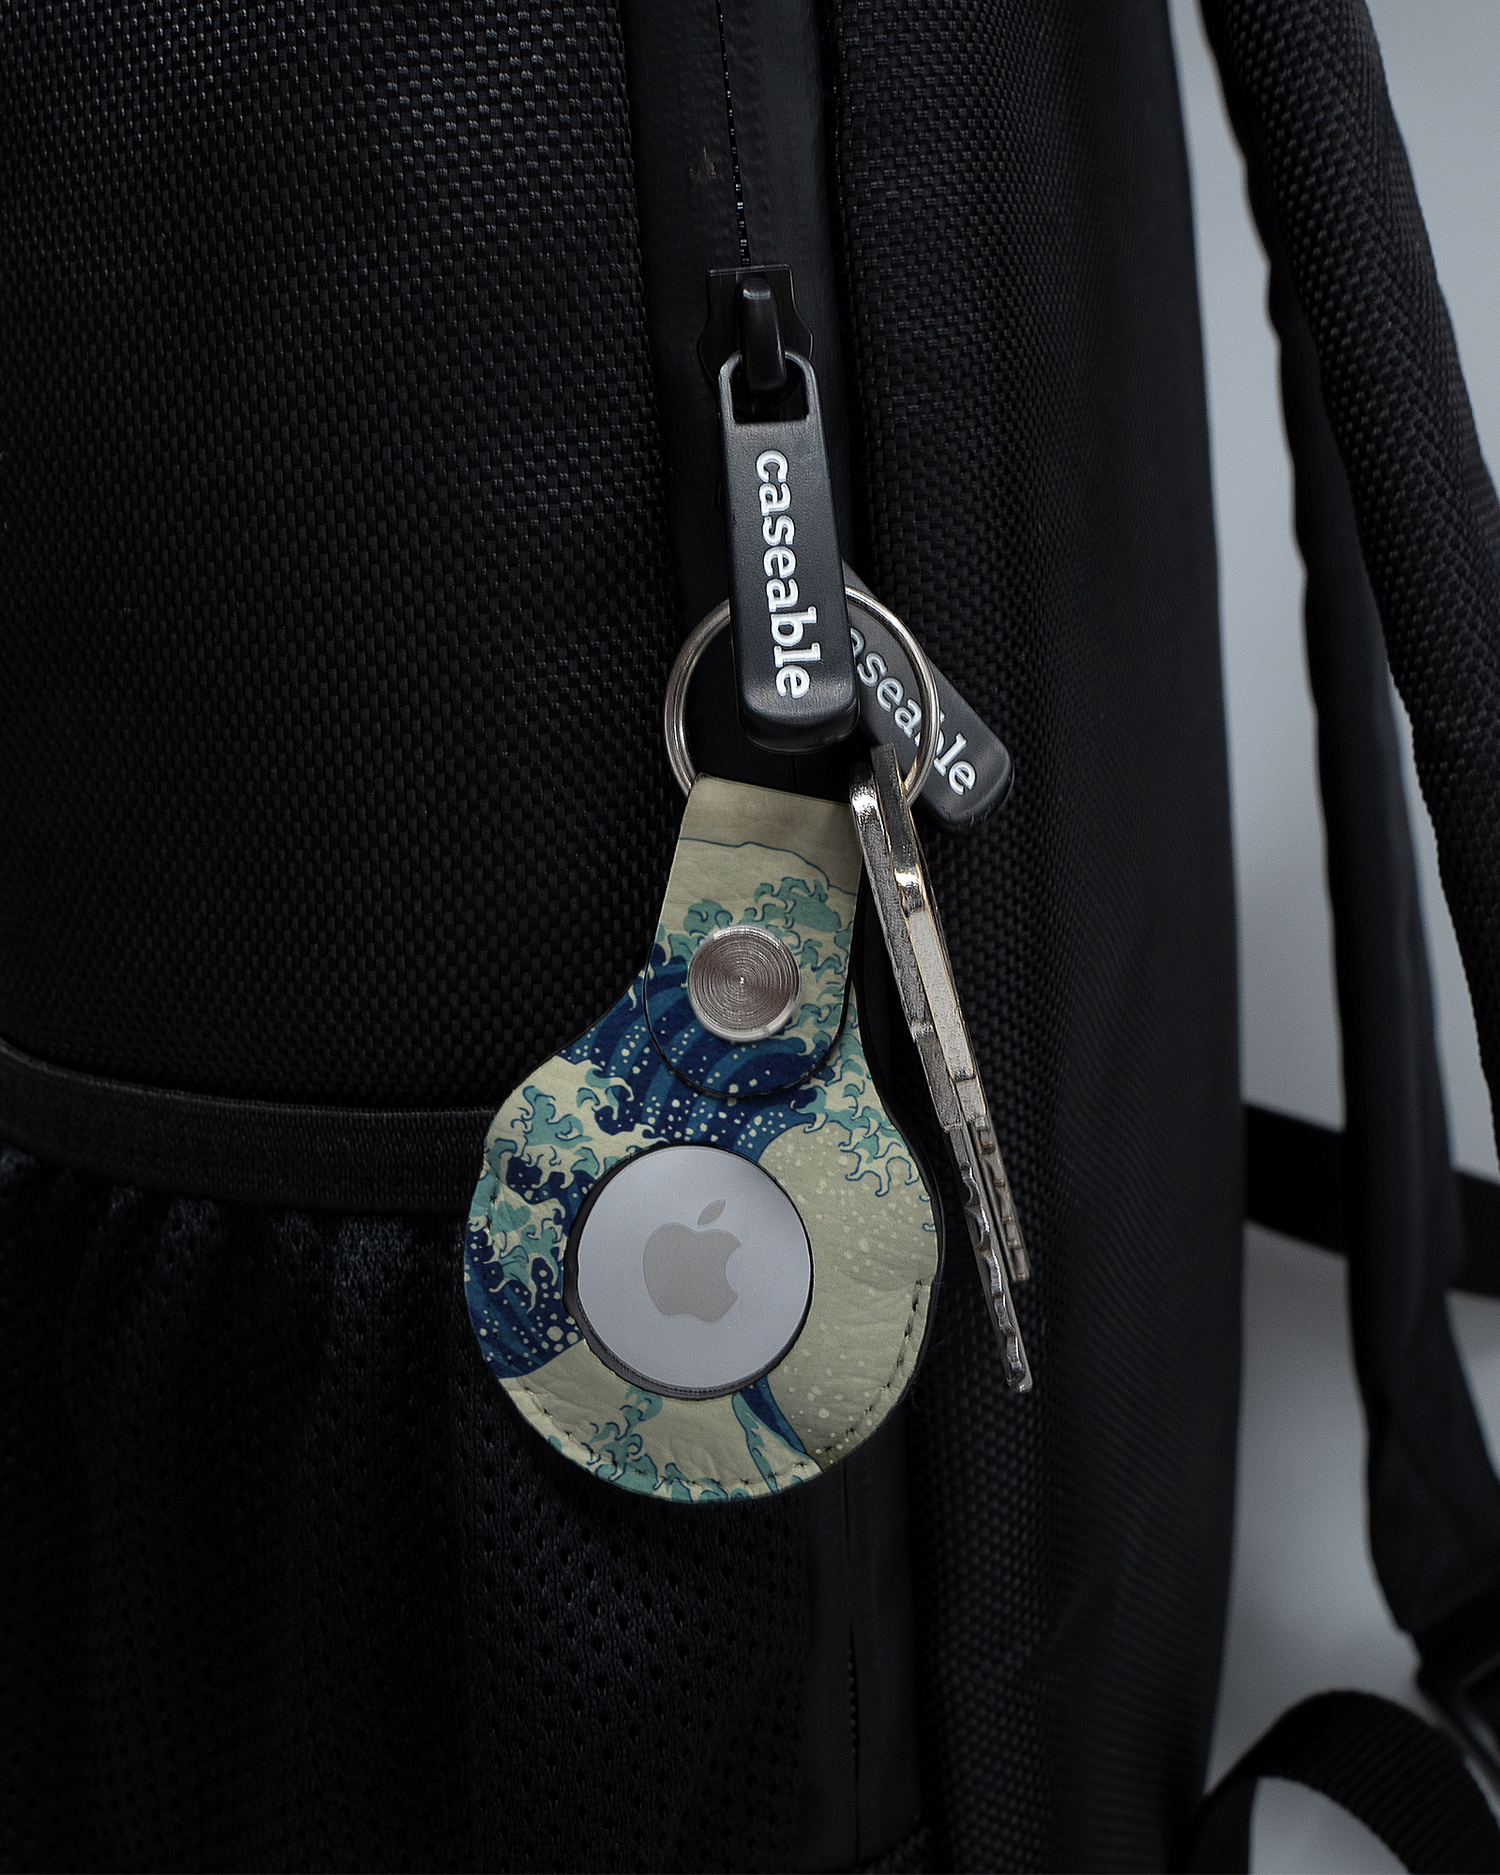 AirTag Holder with design Great Wave Off Kanagawa By Hokusai attached to a bag